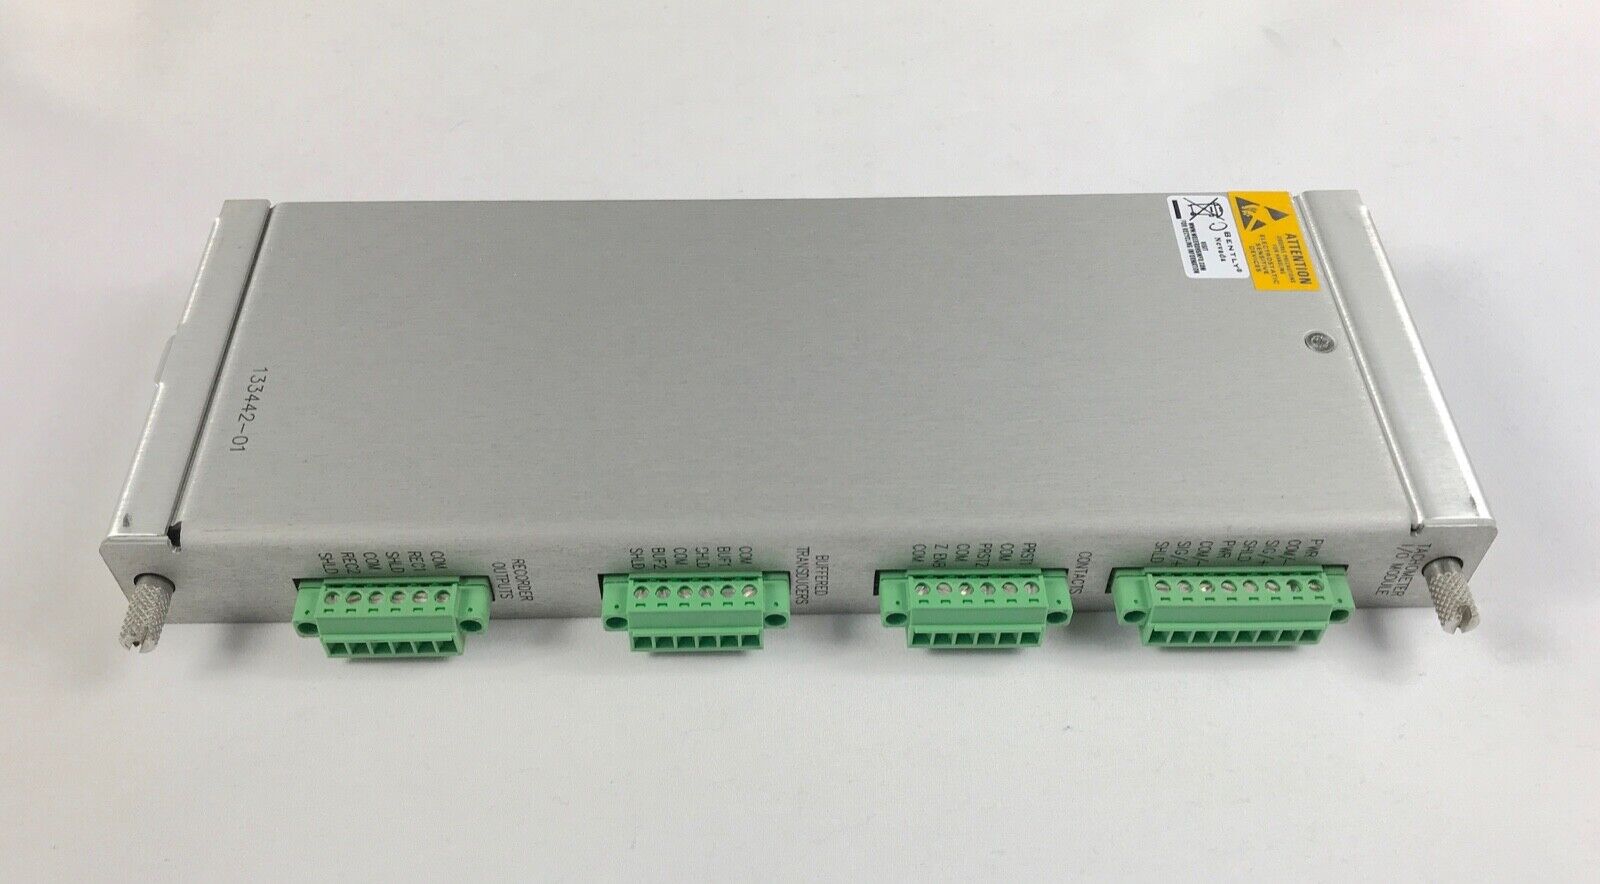 133442-01 Bently Nevada Parts 3500 Rack I/O Module With Internal Terminations 3500/50